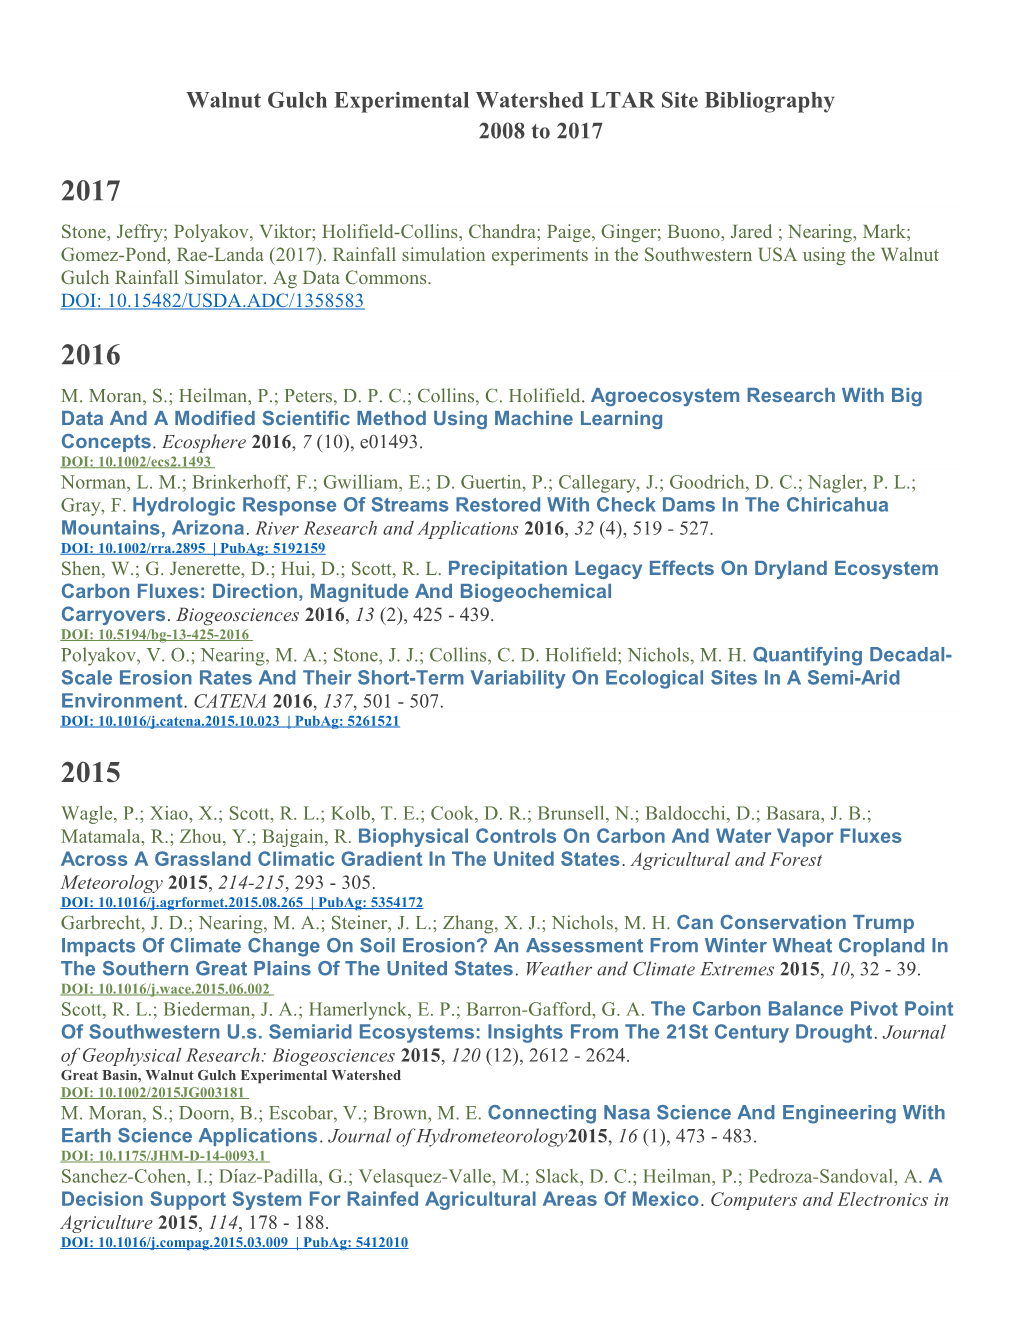 Walnut Gulch Experimental Watershed LTAR Site Bibliography2008 to 2017